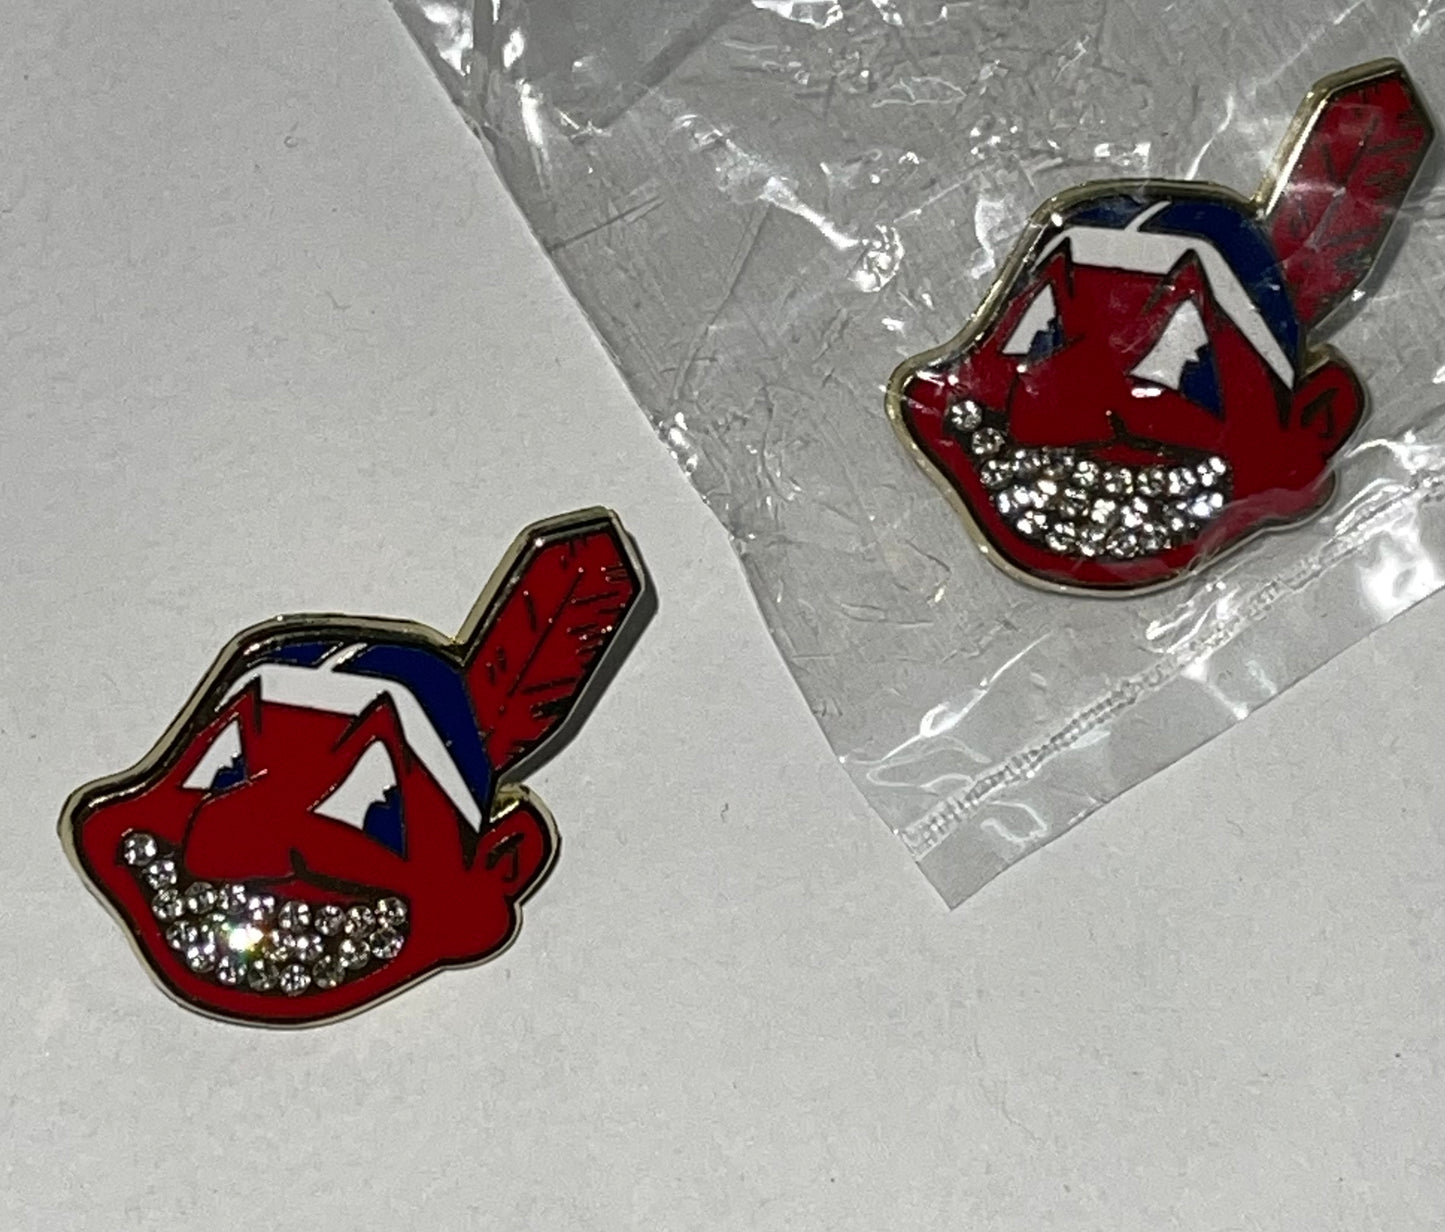 Cleveland Indians Chief Wahoo Banned logo 1995 World Series Fitted with patch on opposite side(Navy Blue) + Free Pin